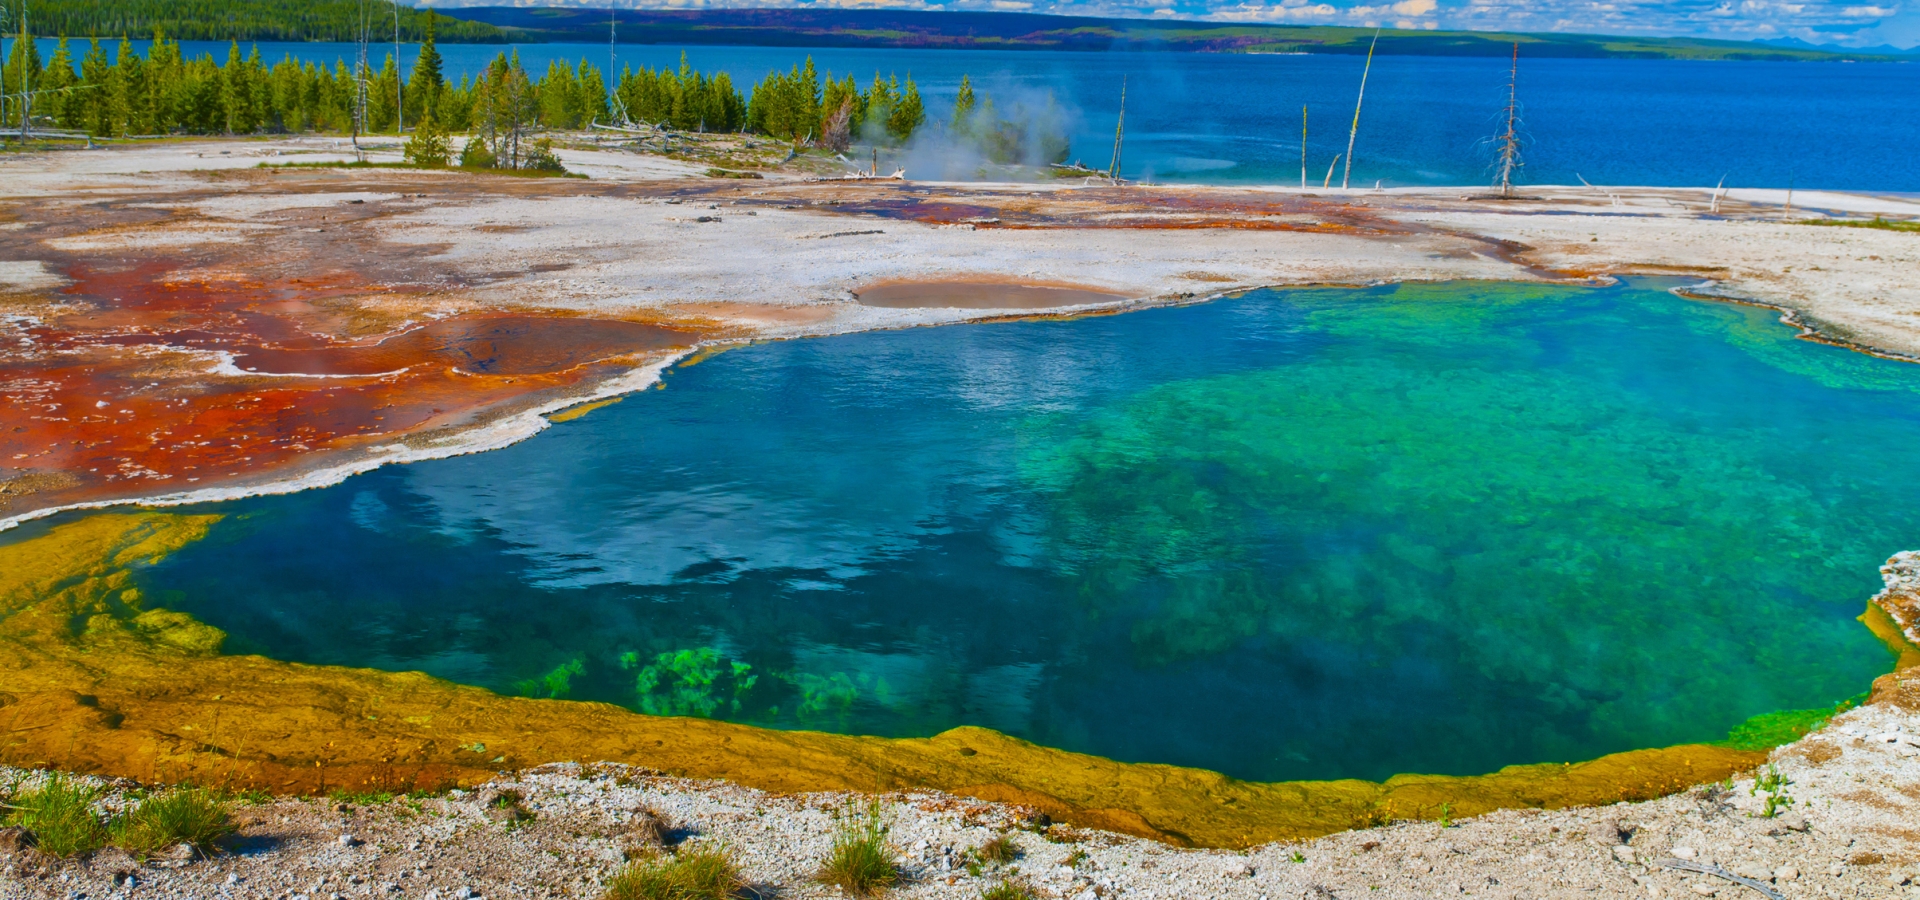 Abyss Pool in the West Thumb Geyser Basin of Yellowstone National Park